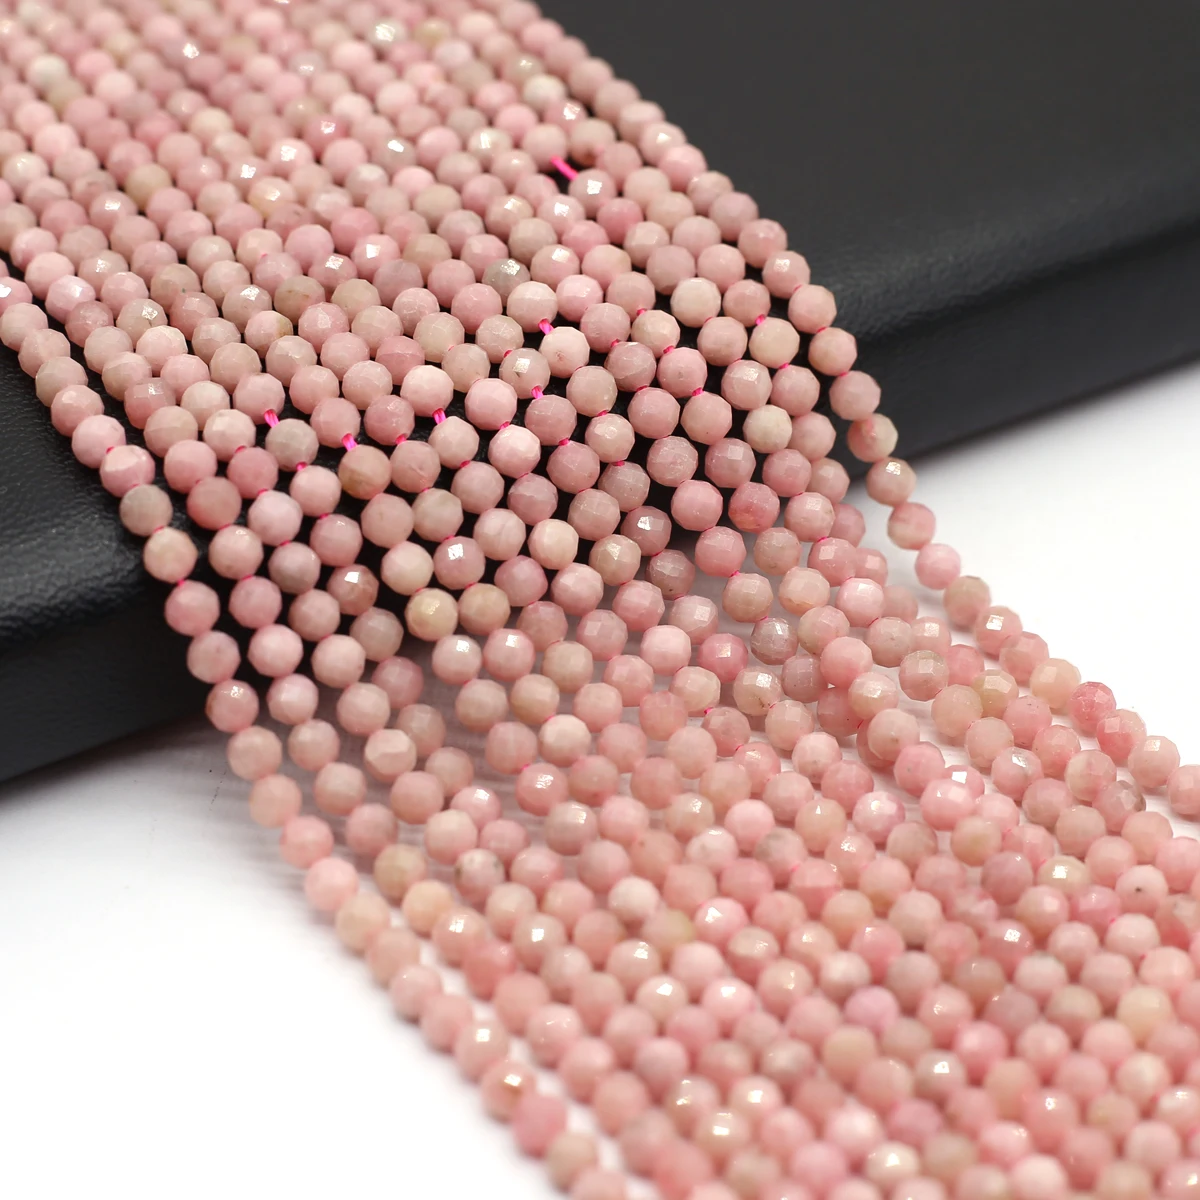 

4mm Natural Pink Opals Beads Section Round Shape Natural Agates Stone Loose Beaded for Making DIY Jewerly Necklace Bracelet